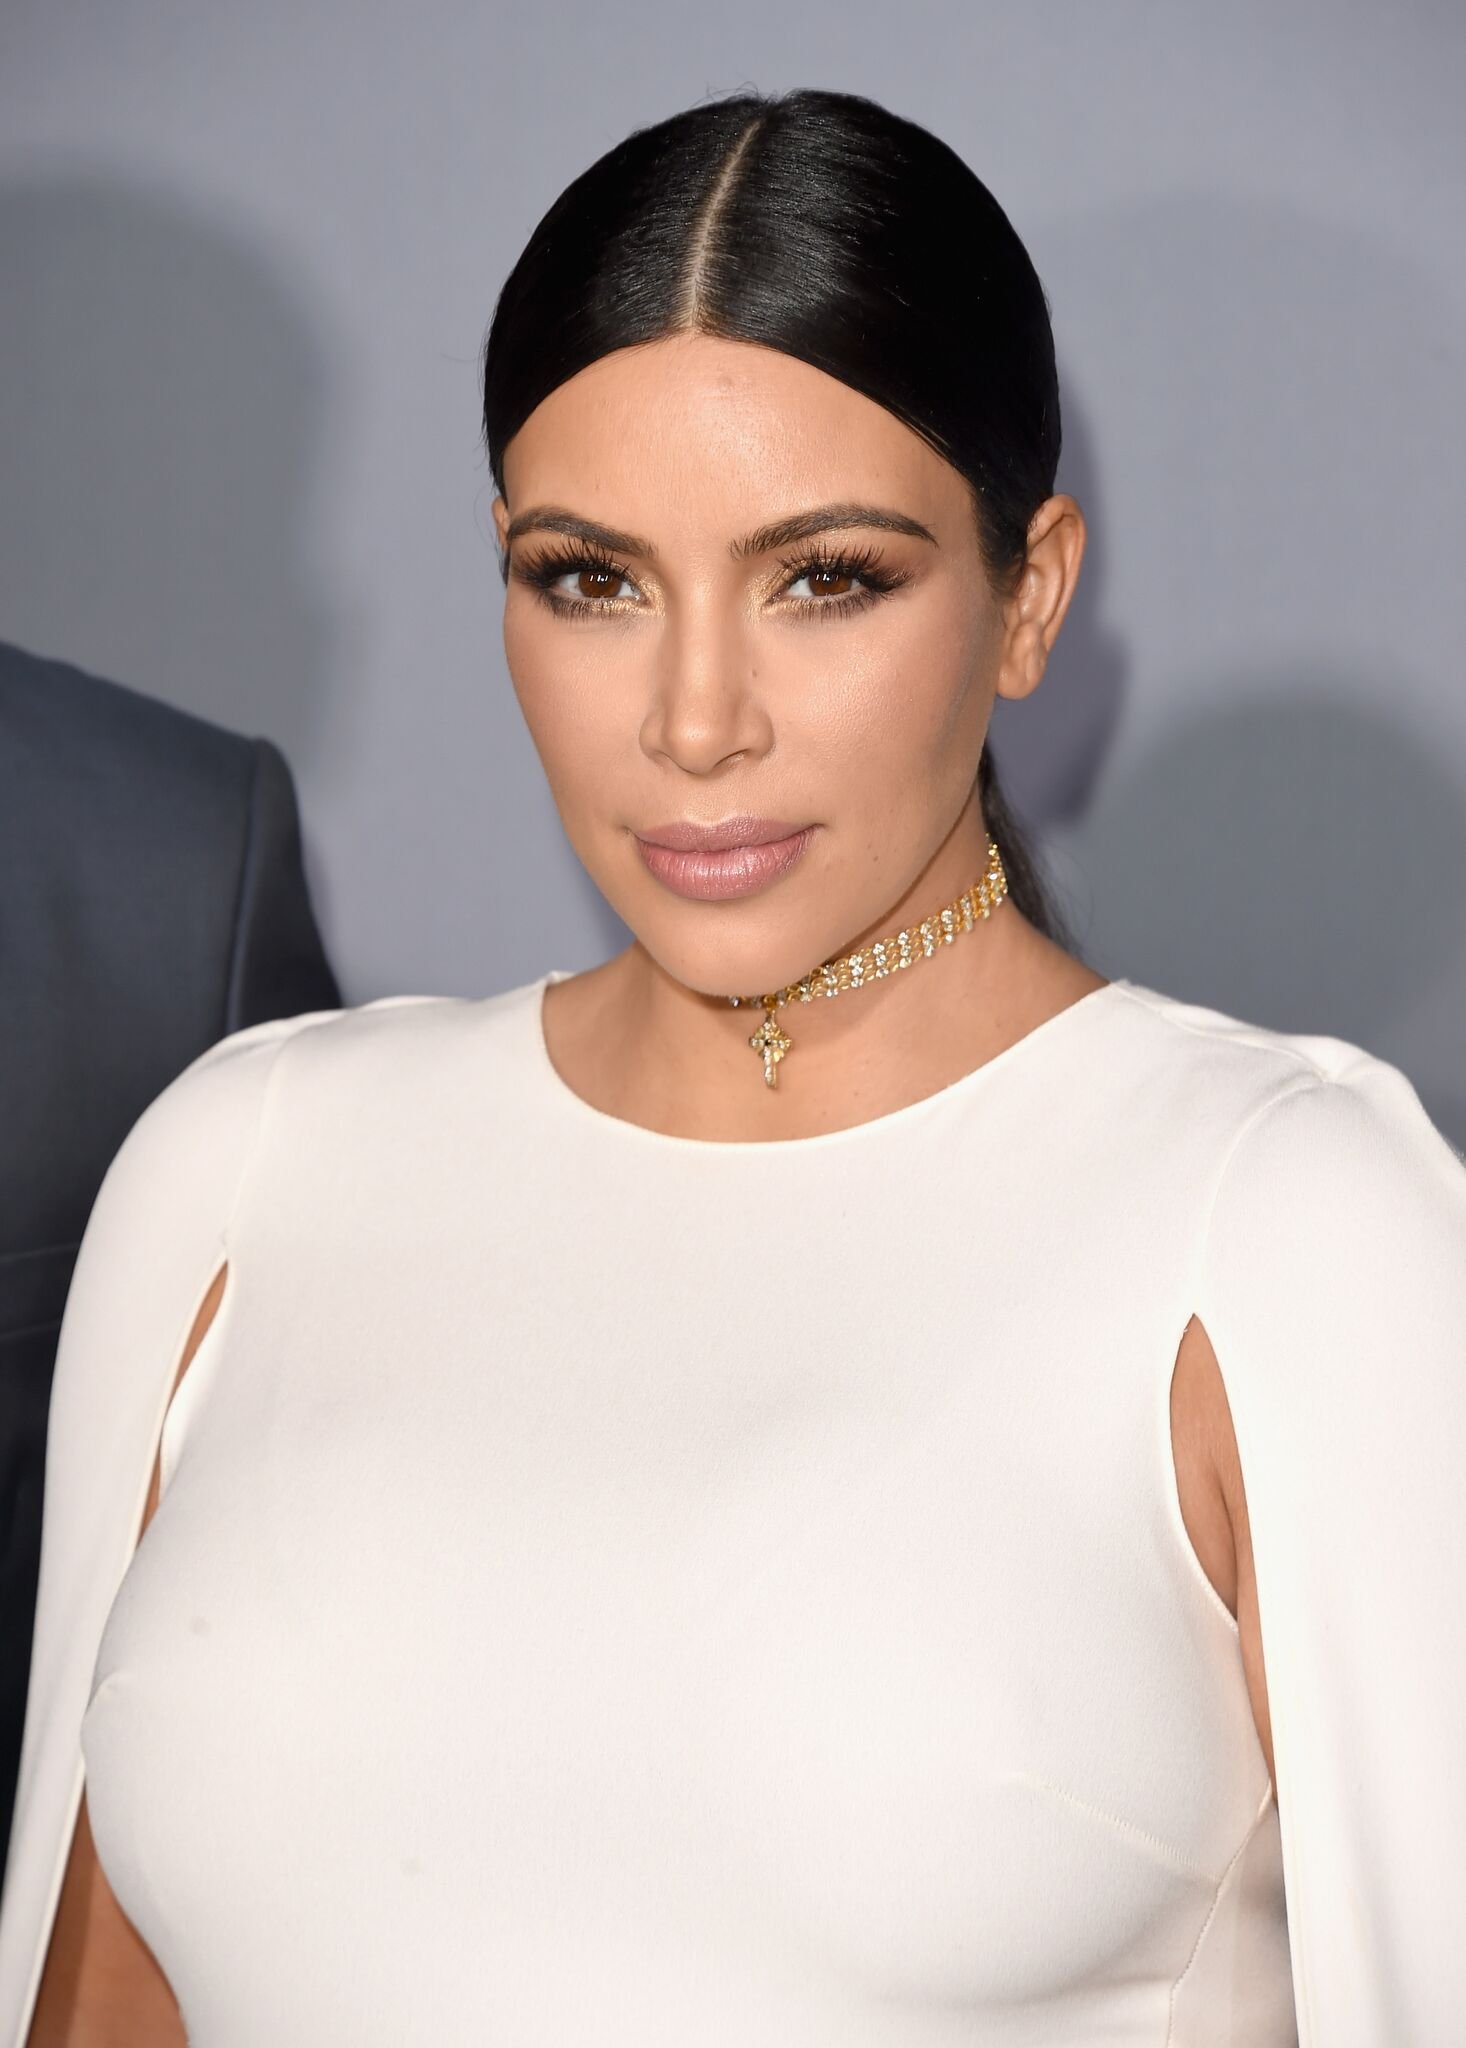 Television Personality Kim Kardashian attends the InStyle Awards at Getty Center on October 26, 2015 | Photo: Getty Images